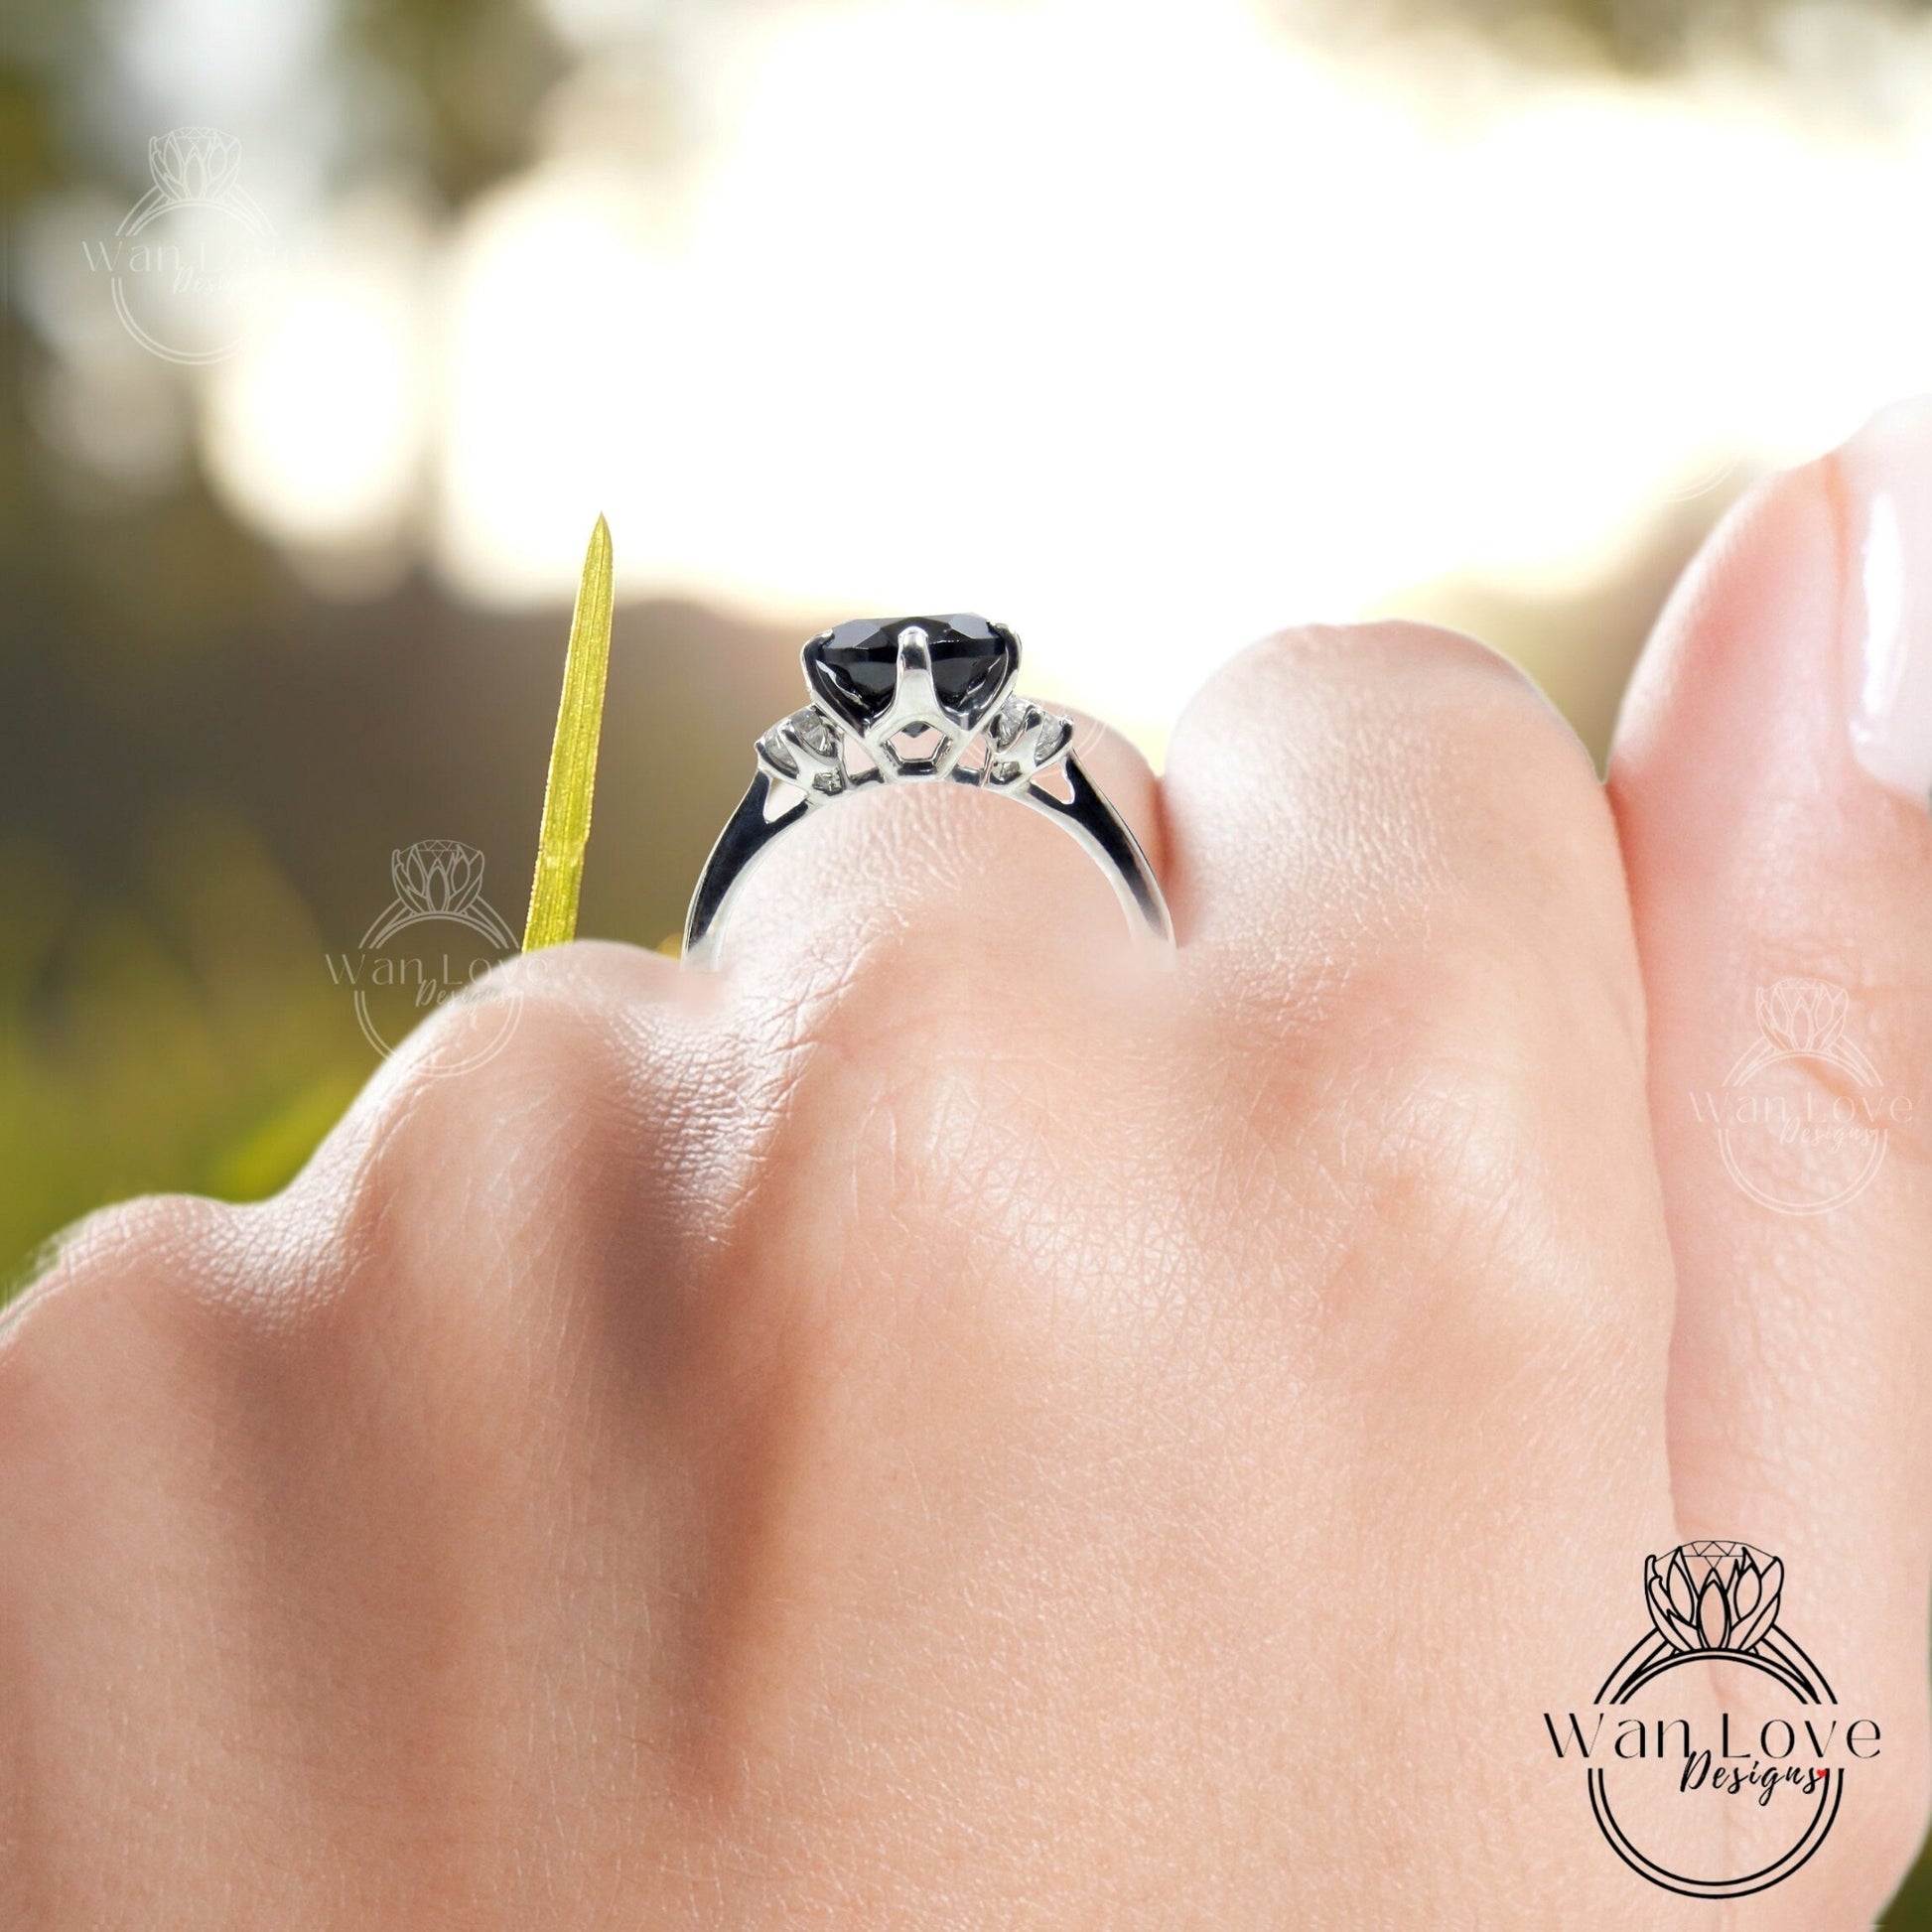 Black Spinel & White Sapphire 3 Stone Round Engagement Ring, 2ct round Past Present Future ring 6 prong dainty bridal wedding ring Ready Wan Love Designs